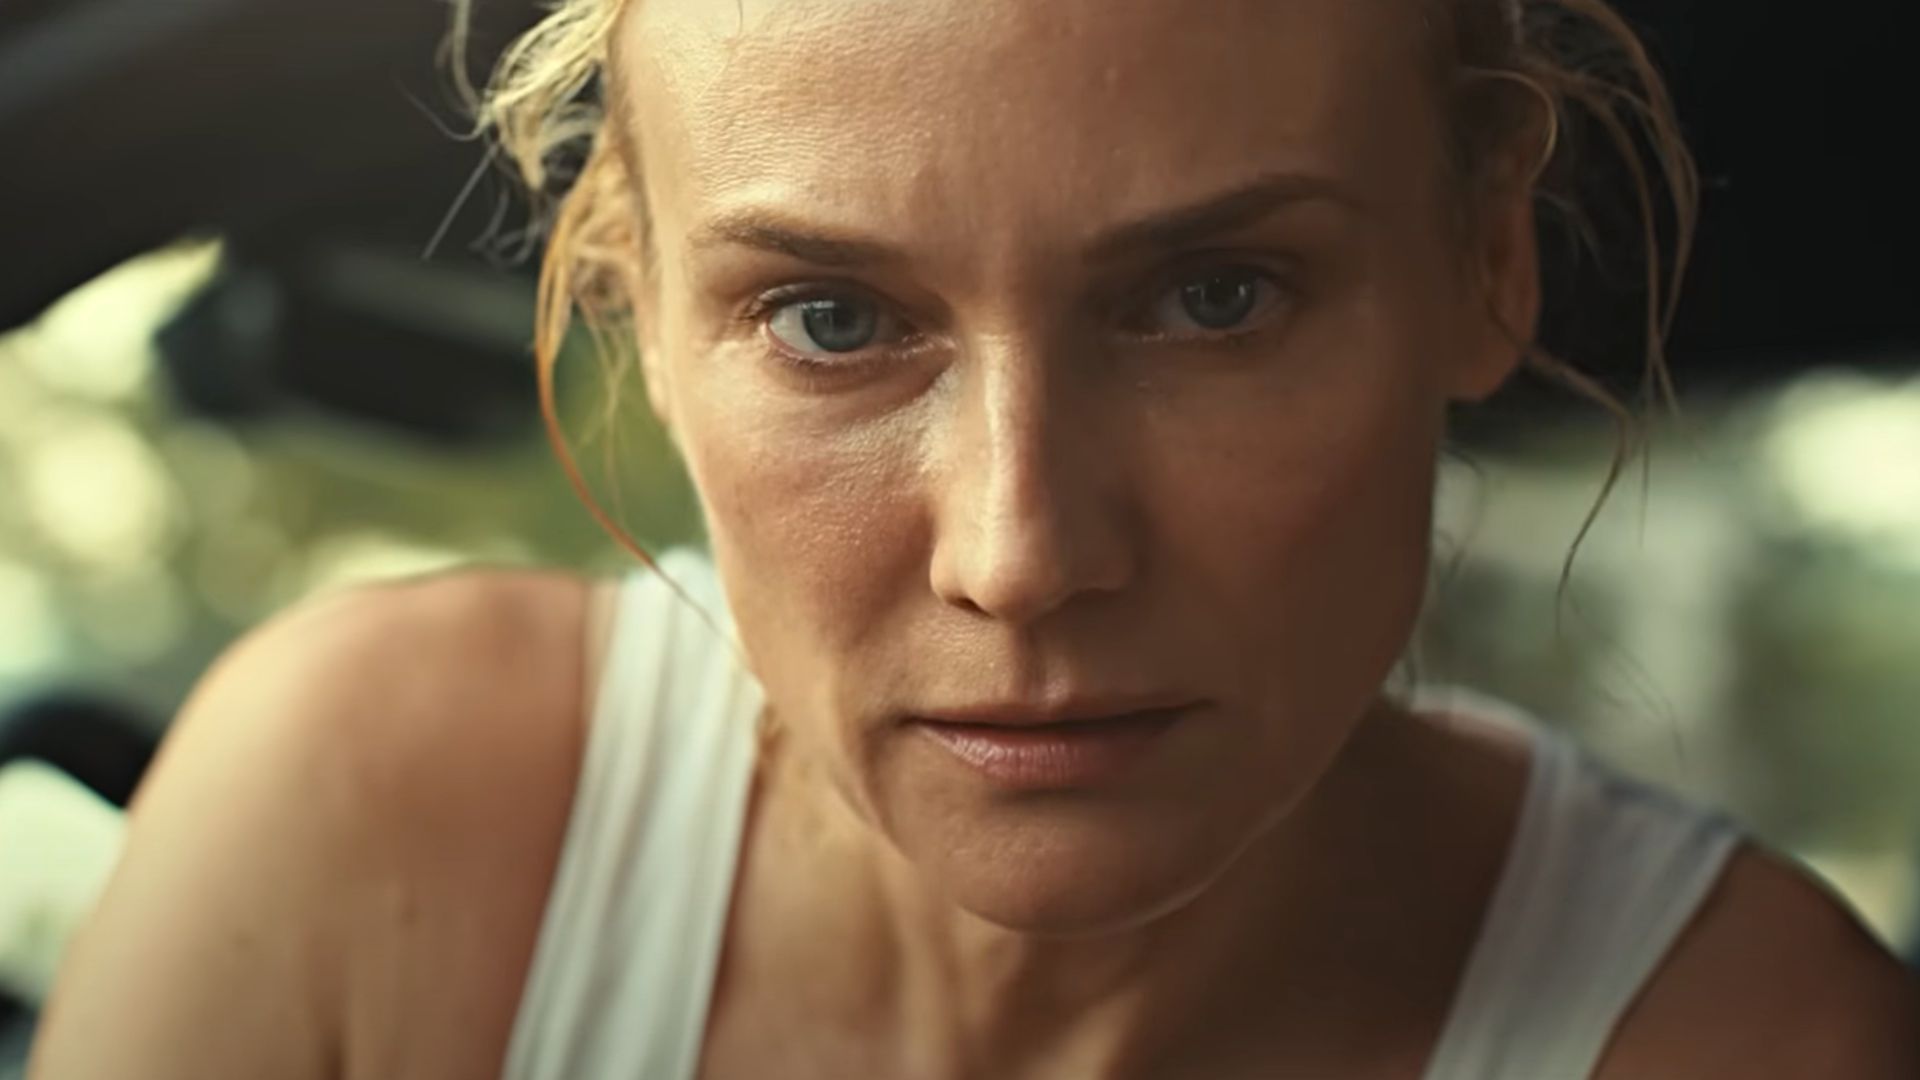 Visions, by Yann Gozlan, with Diane Kruger and Mathieu Kassovitz